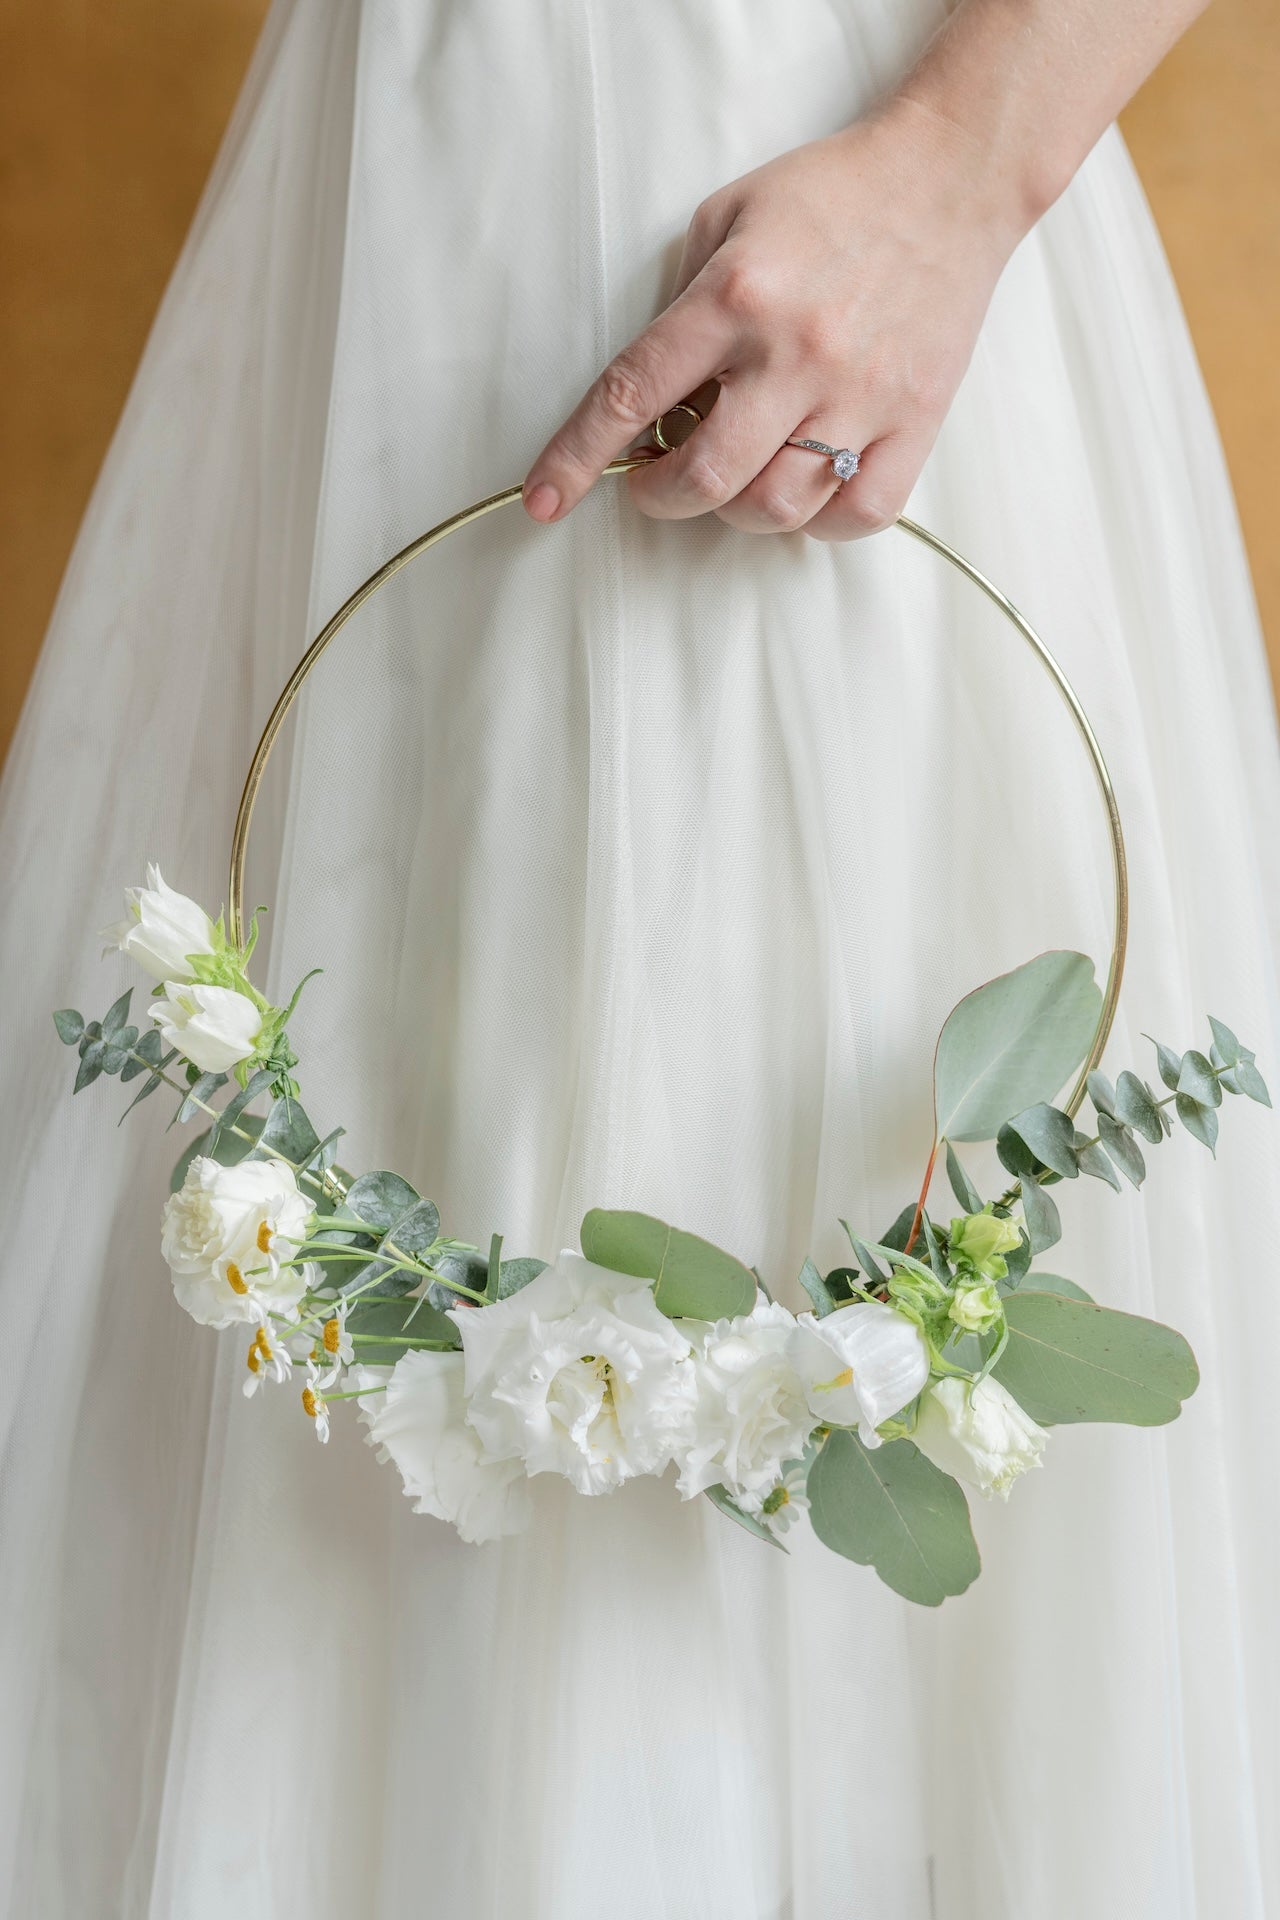 vancouver-bc-Wedding-gril-holding-a-flower-decorated-golden-ring